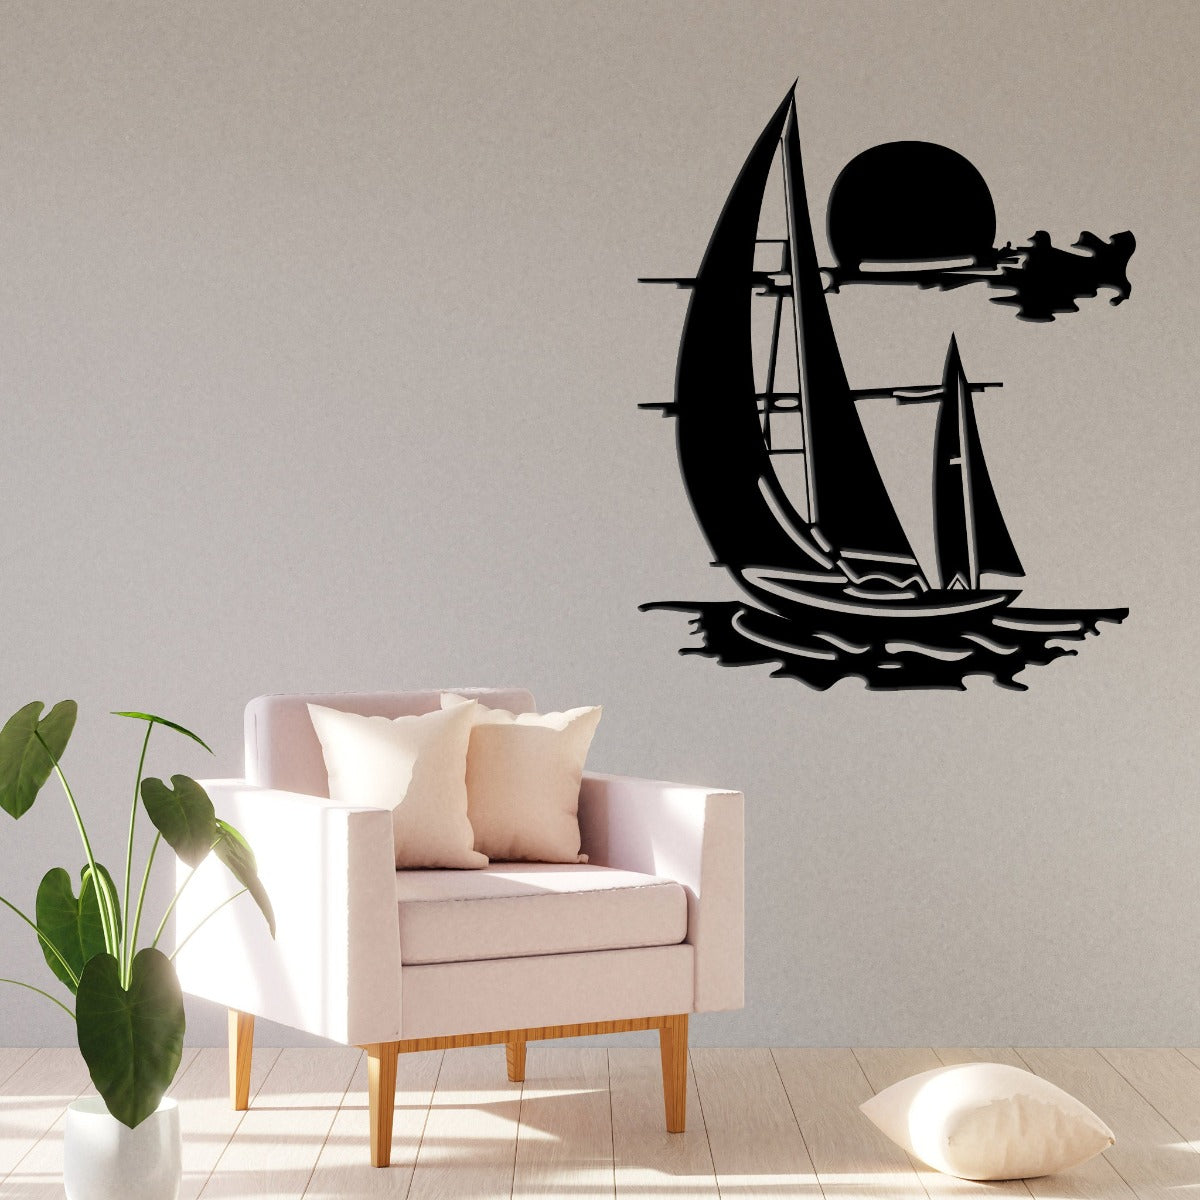 The Boat- Laser Wall Art